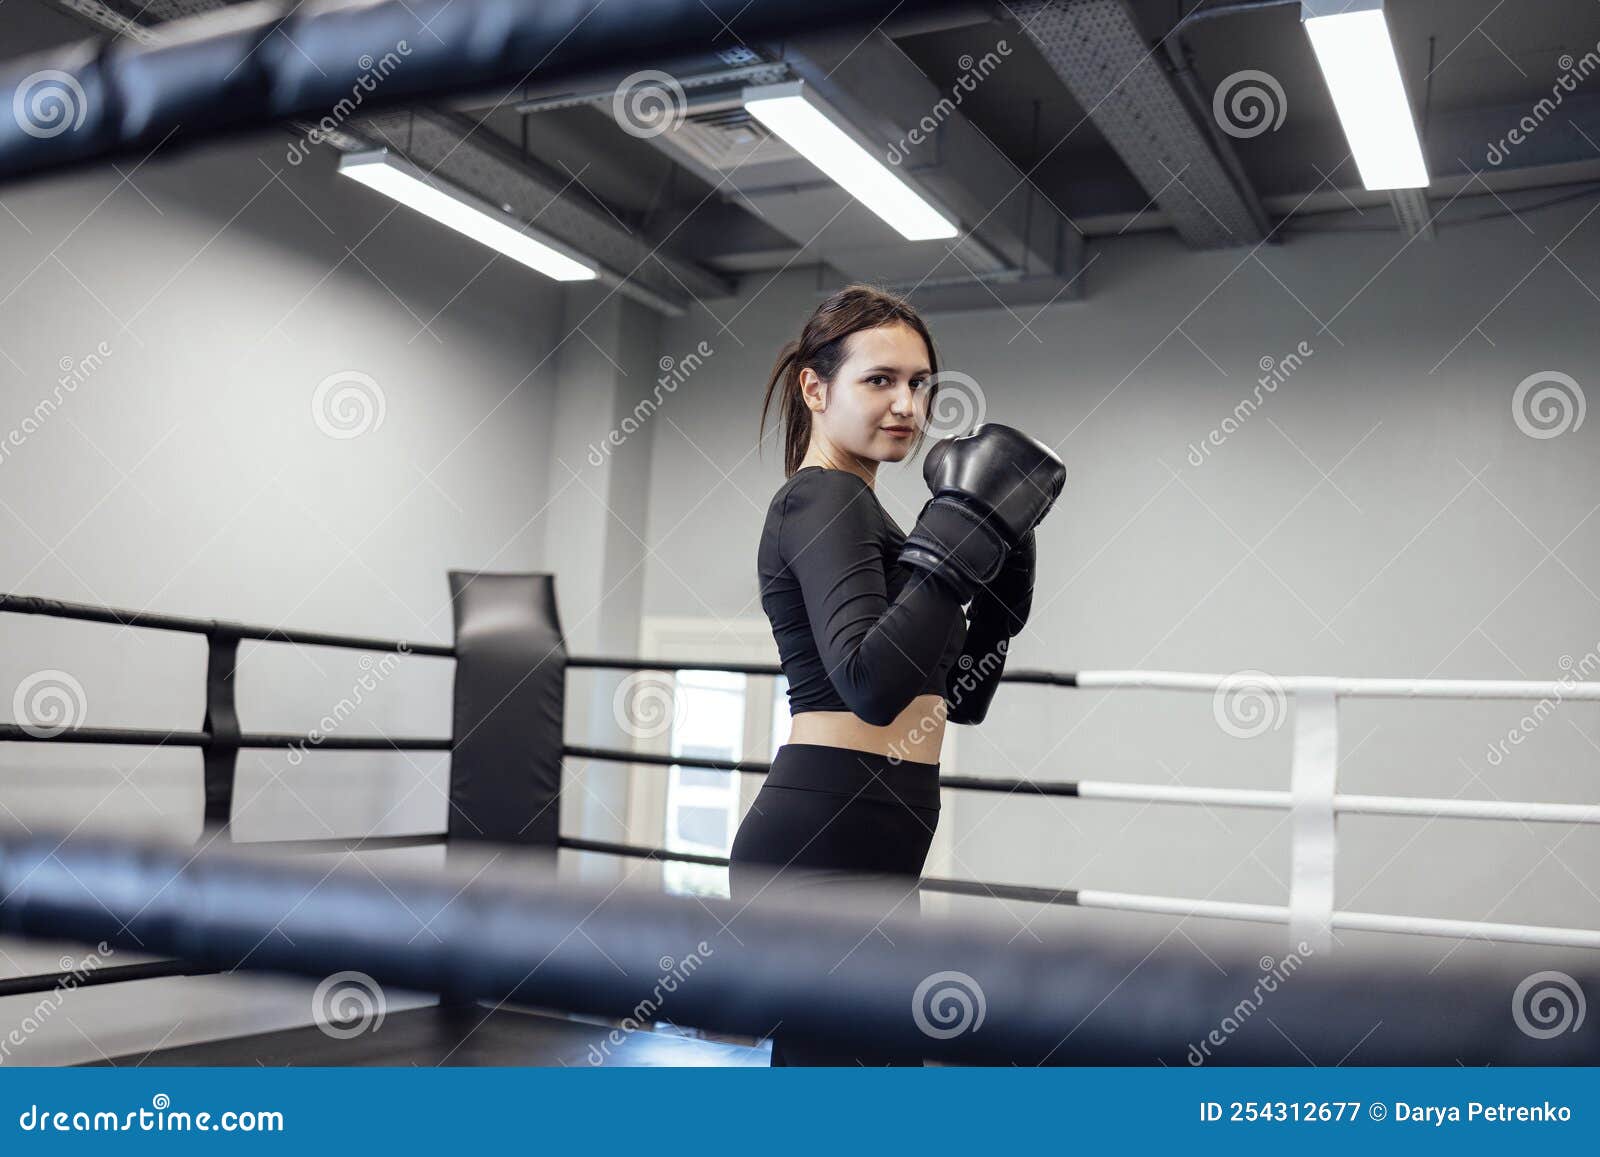 10,511+ Muay thai Images: Royalty-Free Stock Photos and Illustrations -  PIXTA